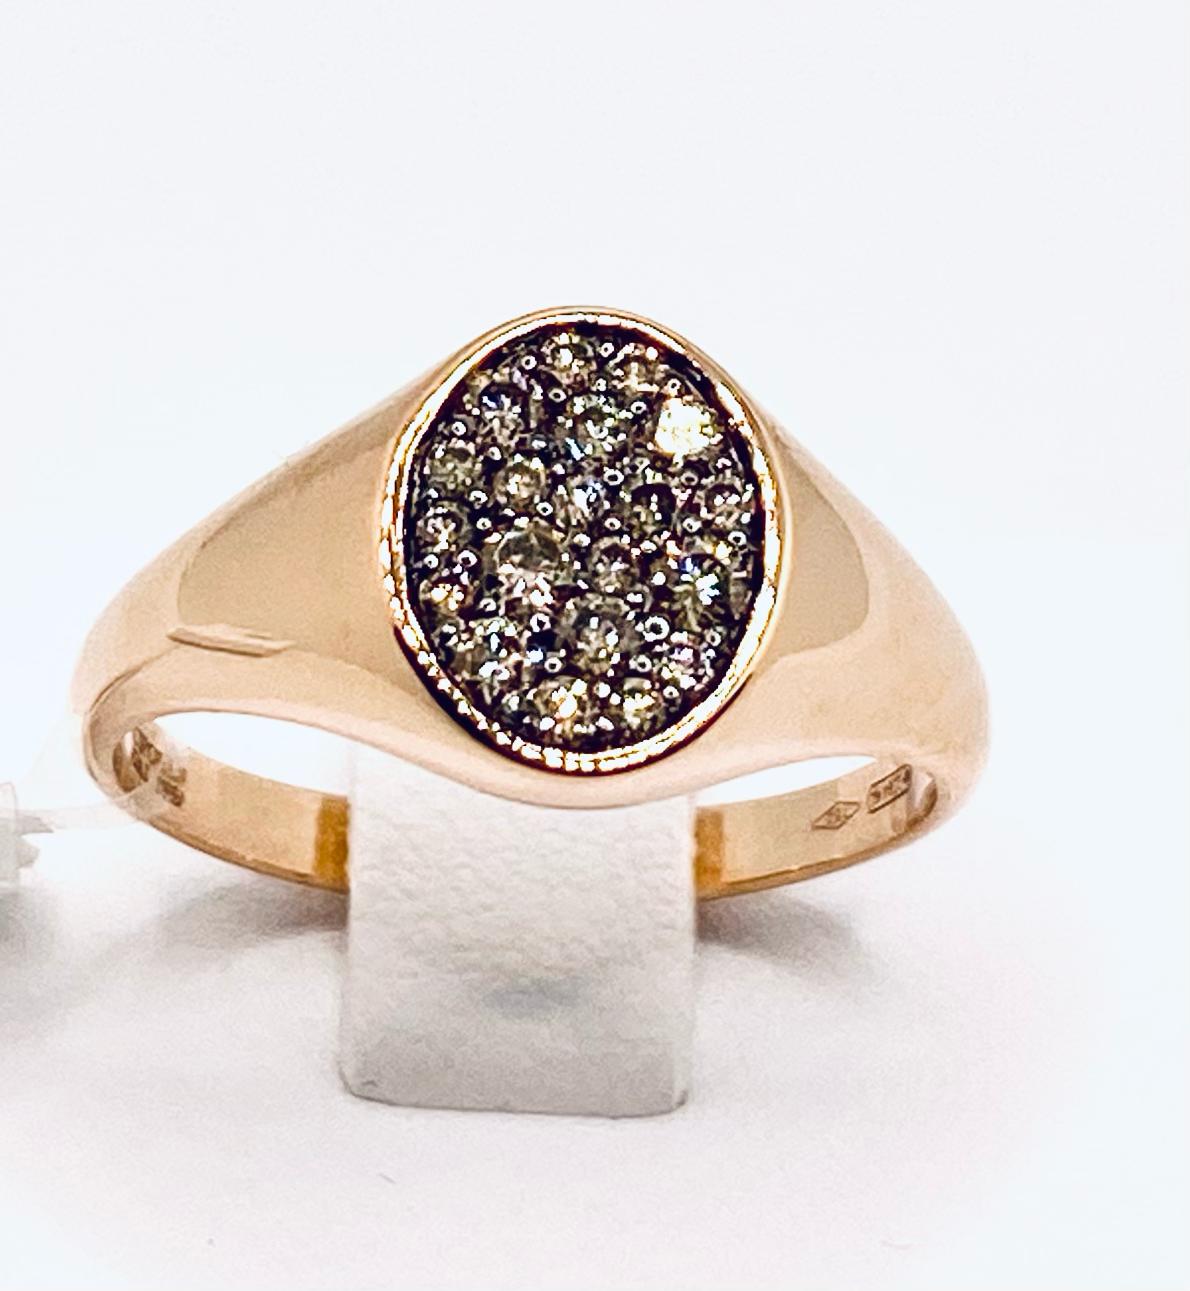 Chevalier ring with brown diamonds art.635A01BP